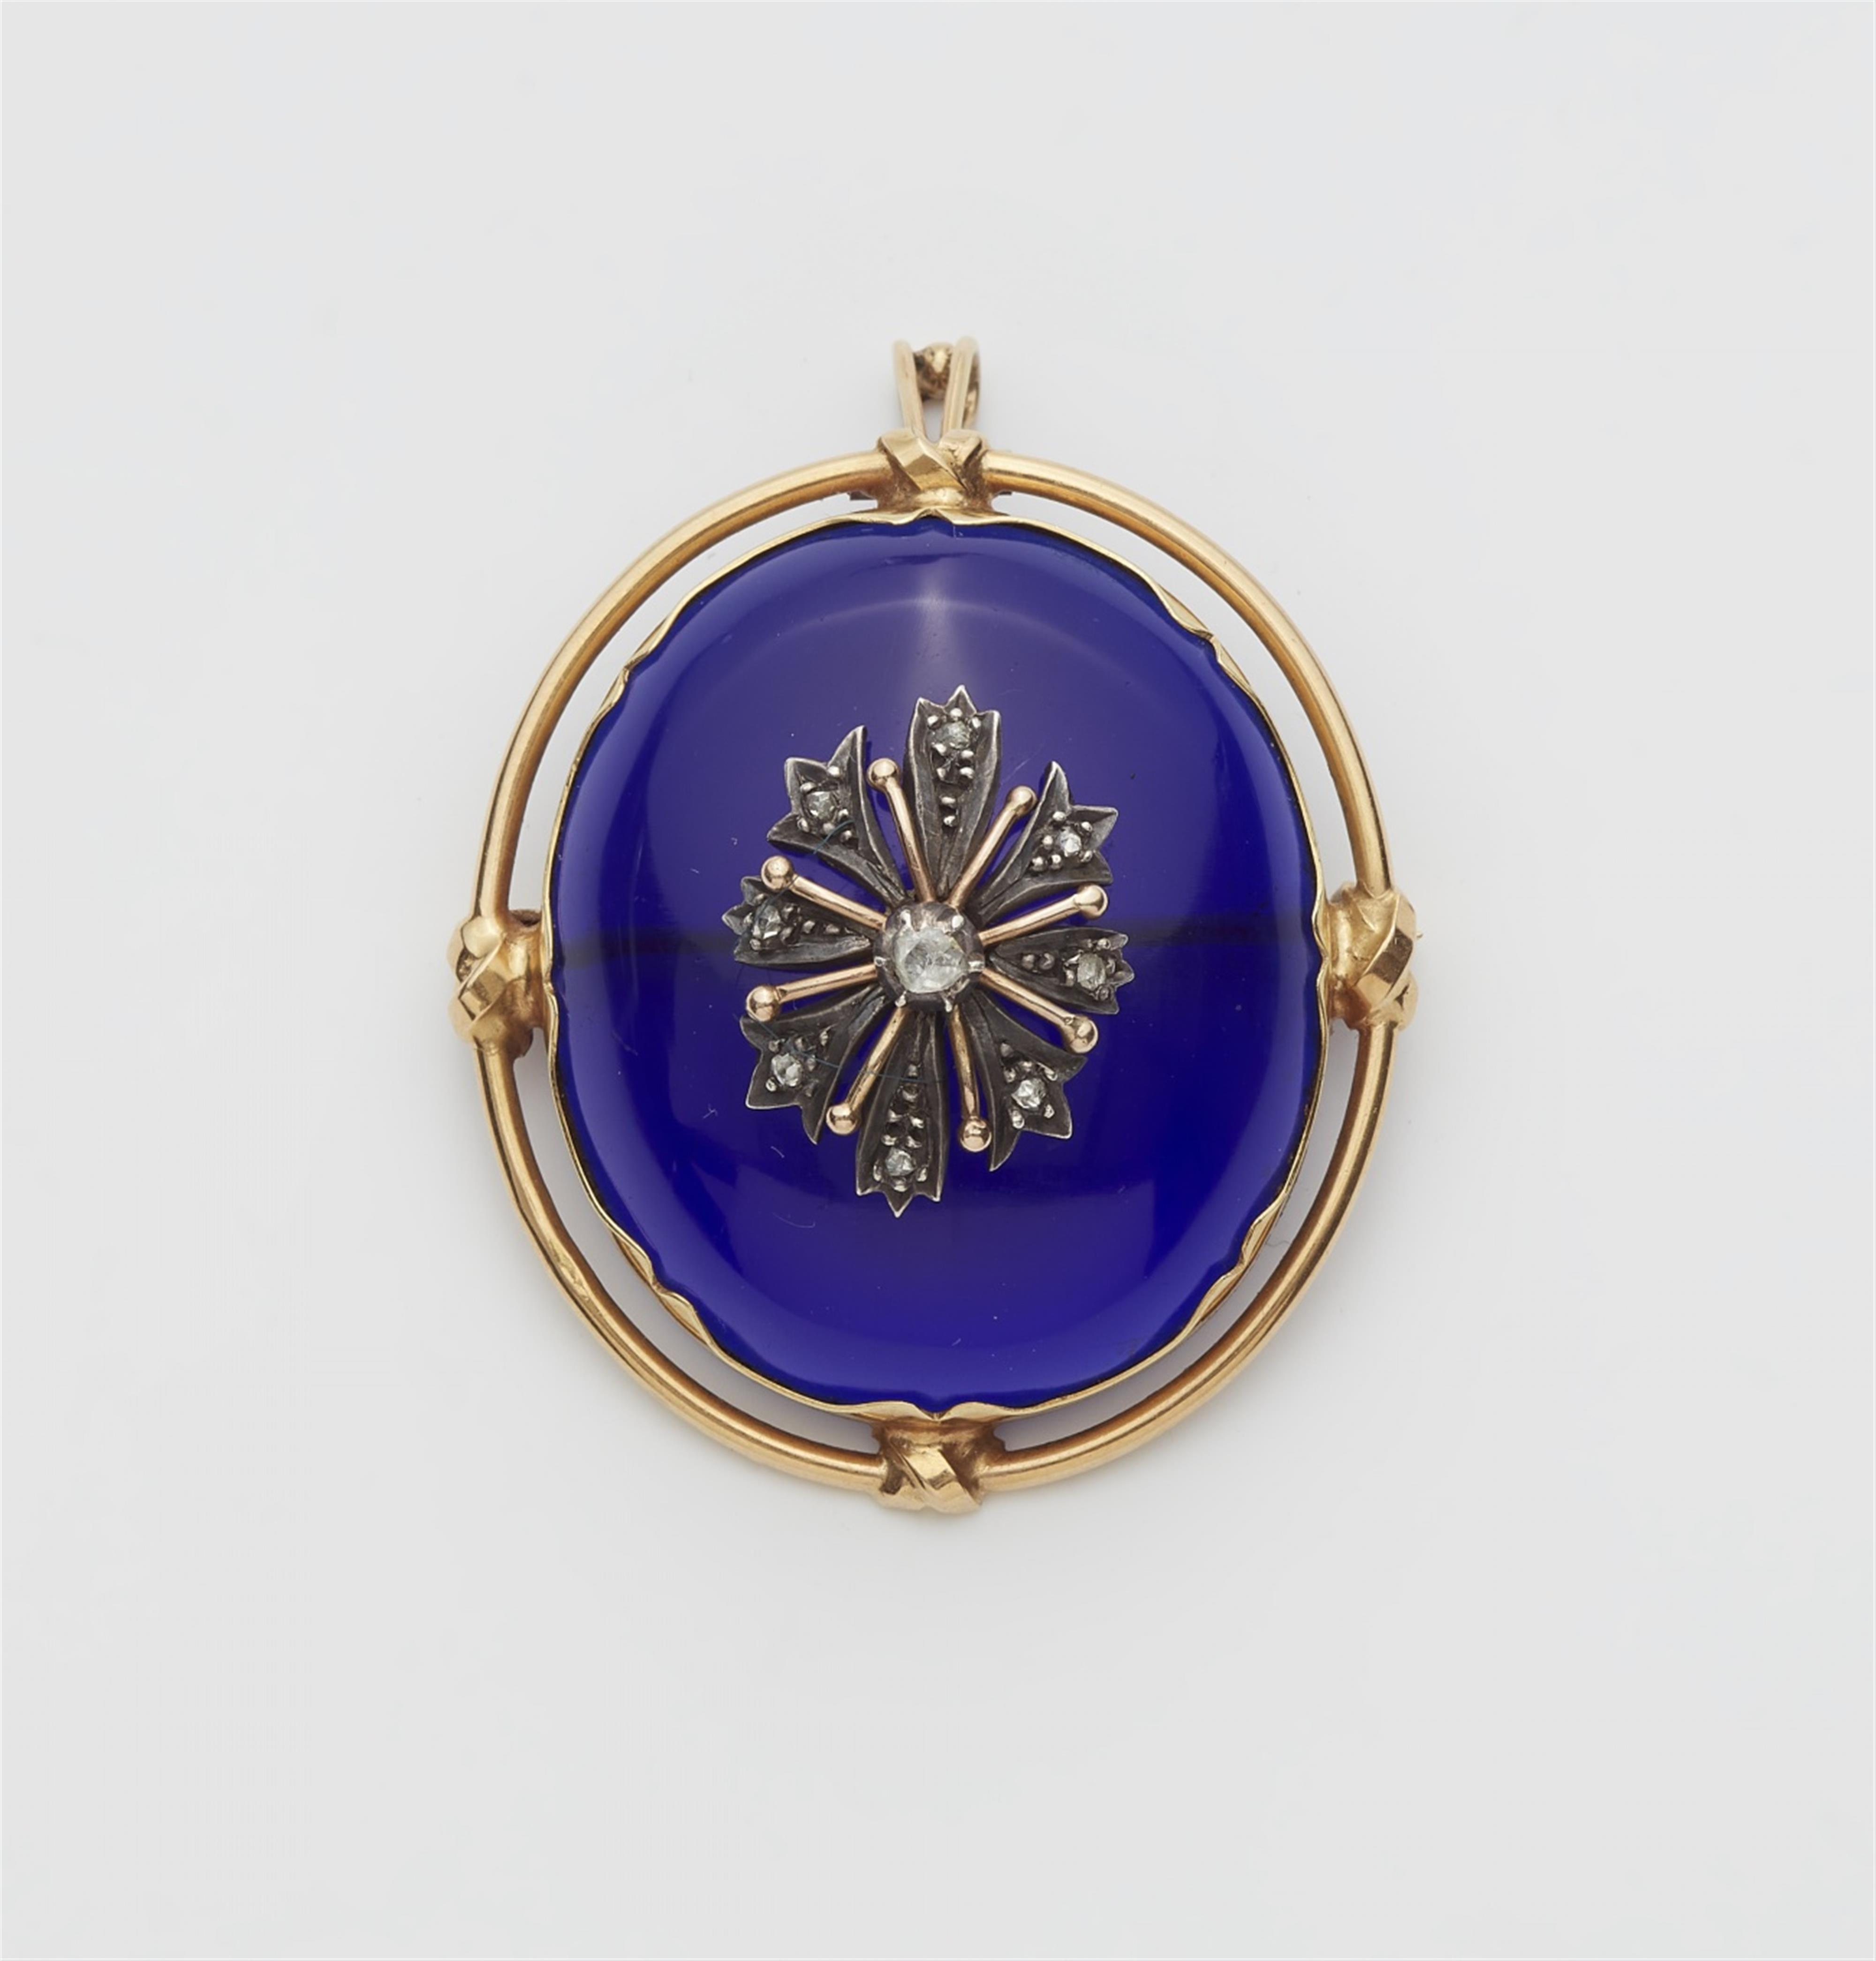 A 14k gold pendant brooch with a blue paste cabochon - image-1